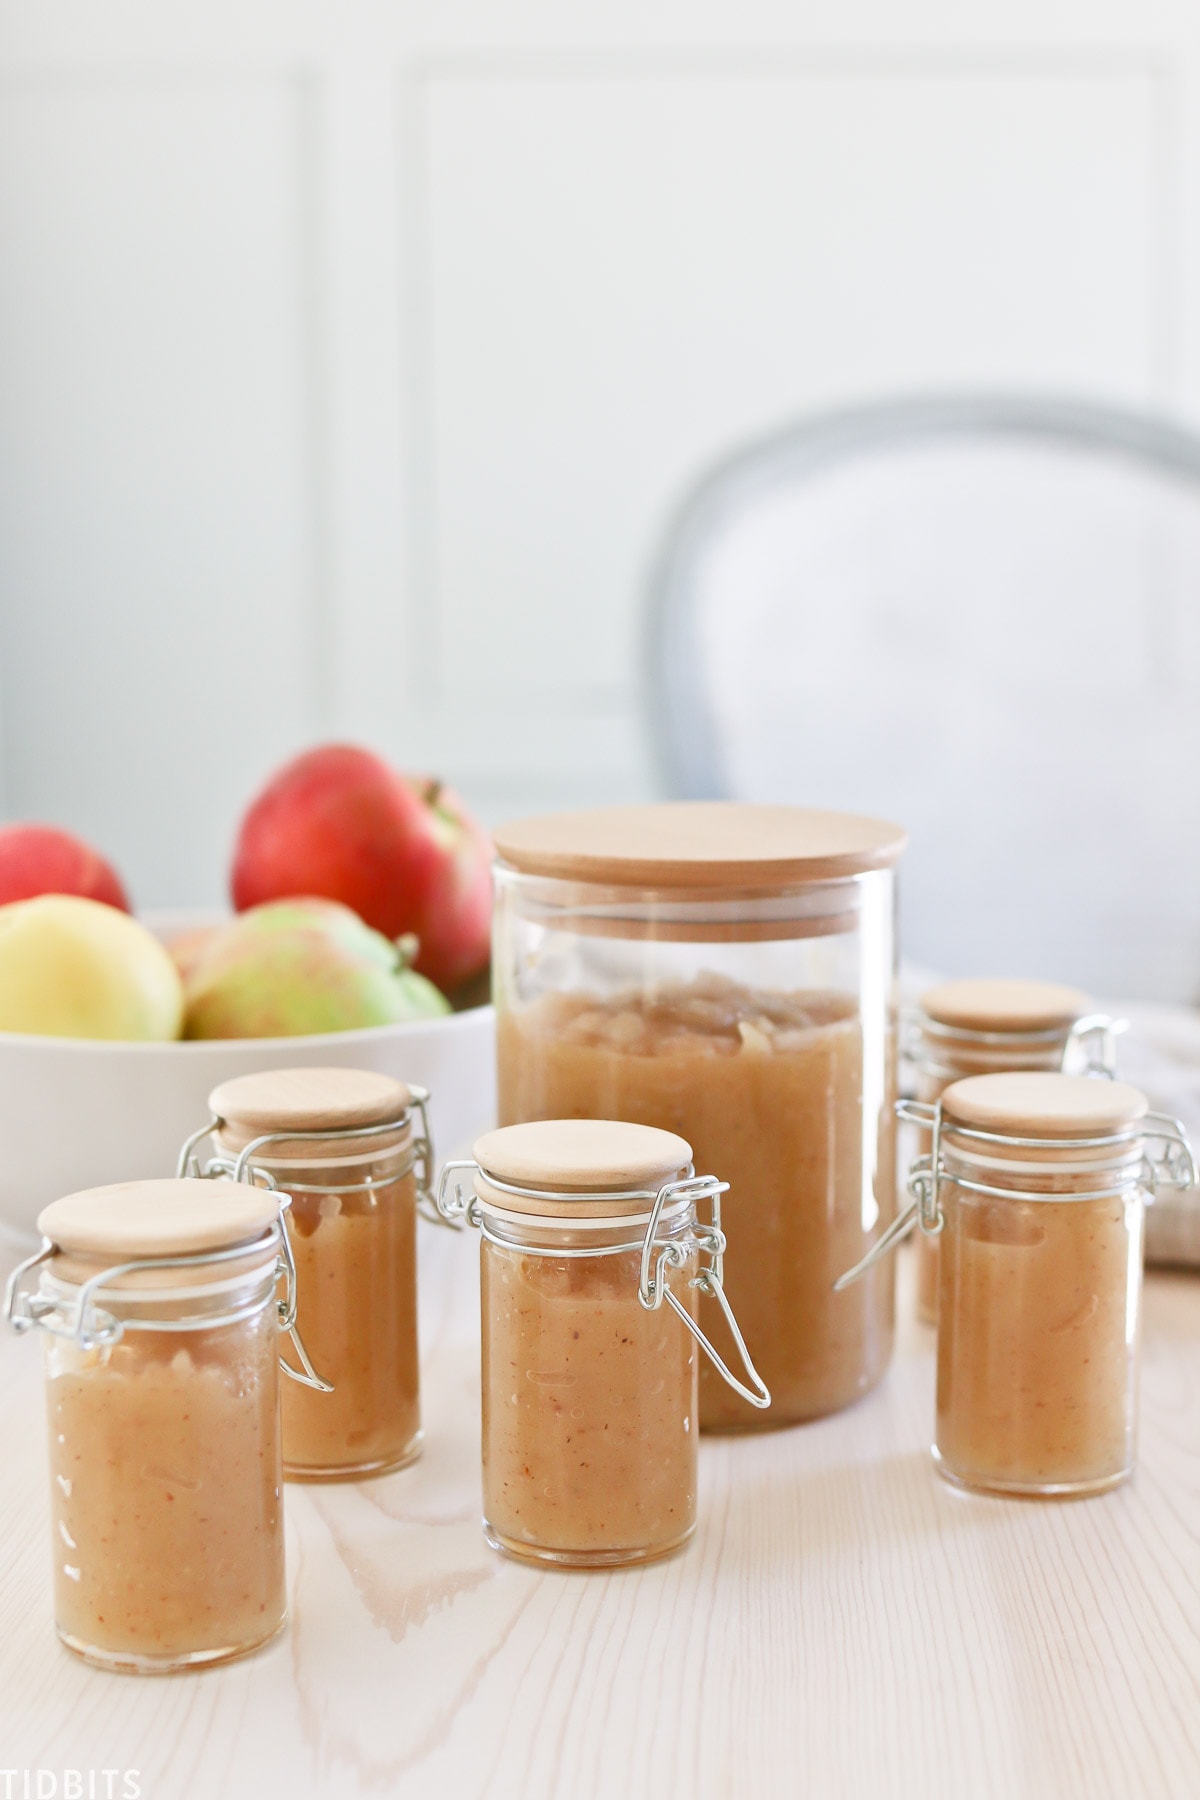 Flavorful, no sugar added stovetop applesauce recipe and instructions.